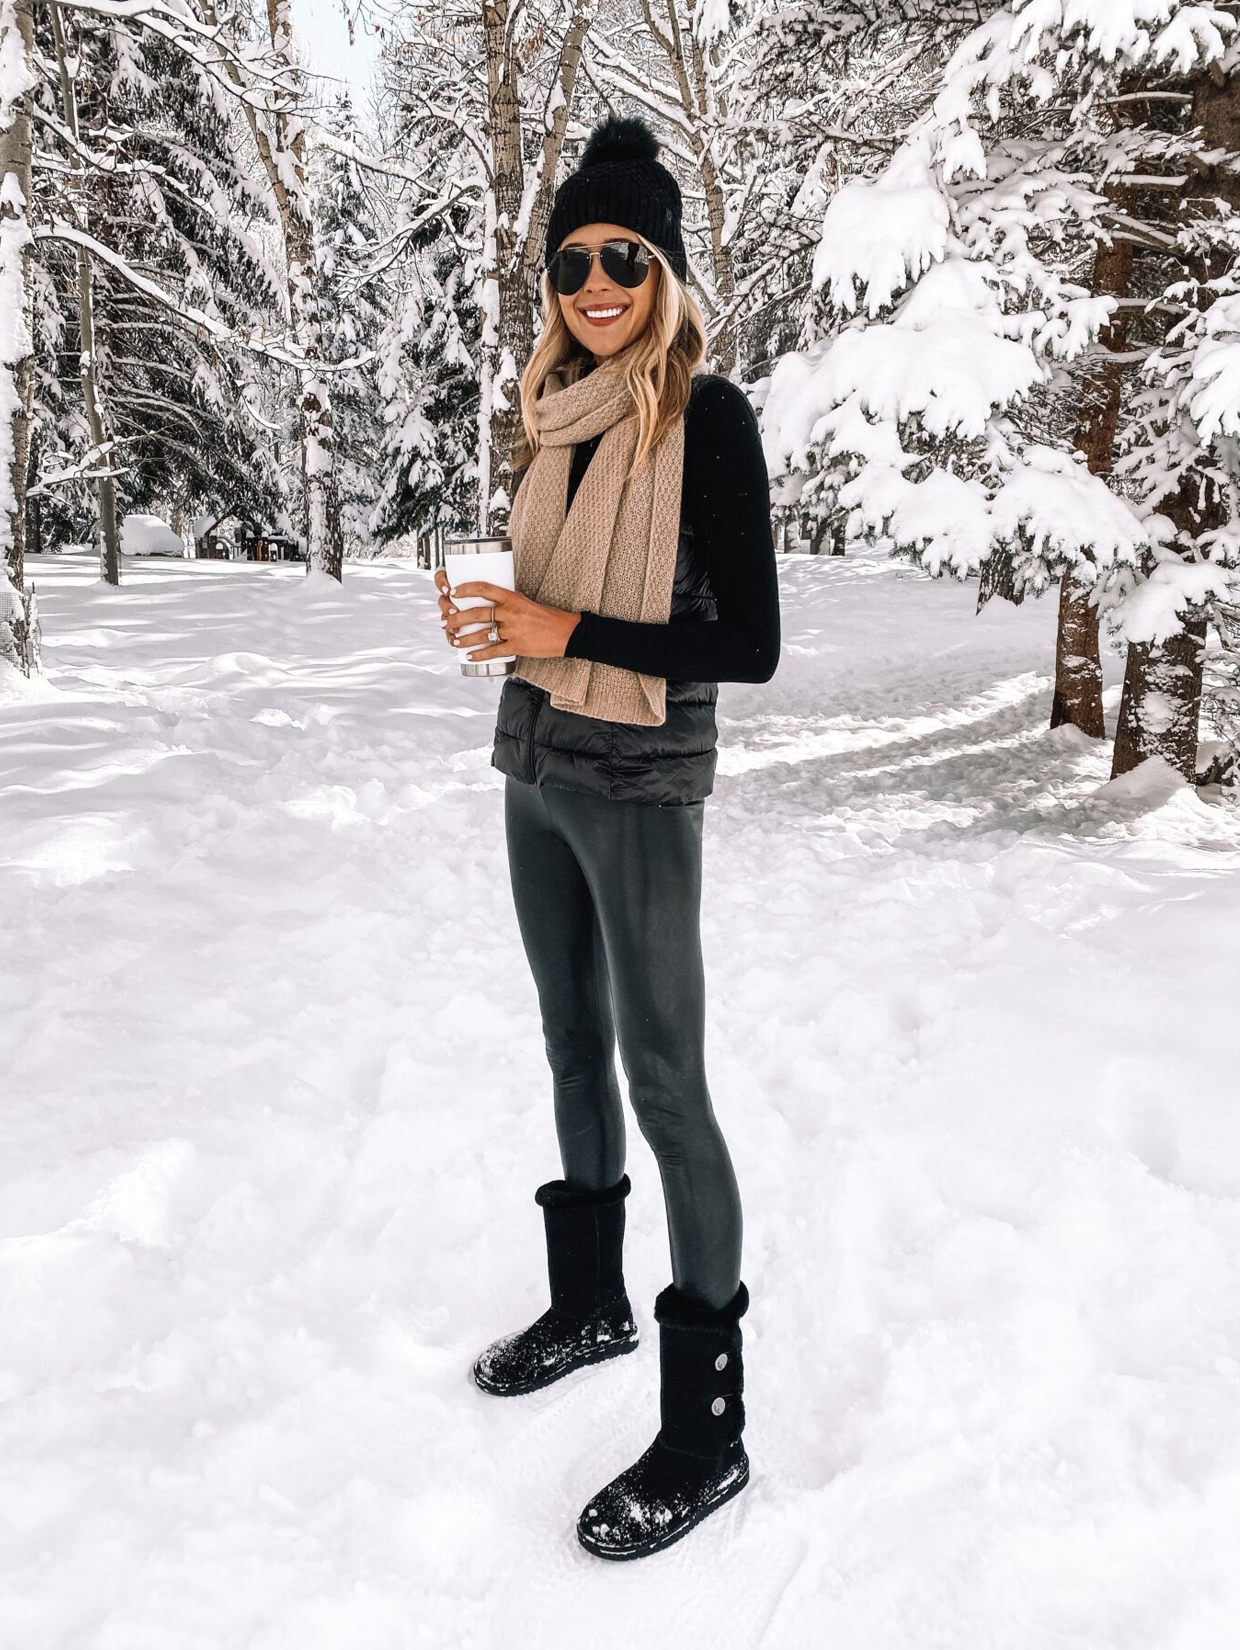 What to Pack for a Ski Trip: Best Gear & Outfit Guide | Fashion Jackson